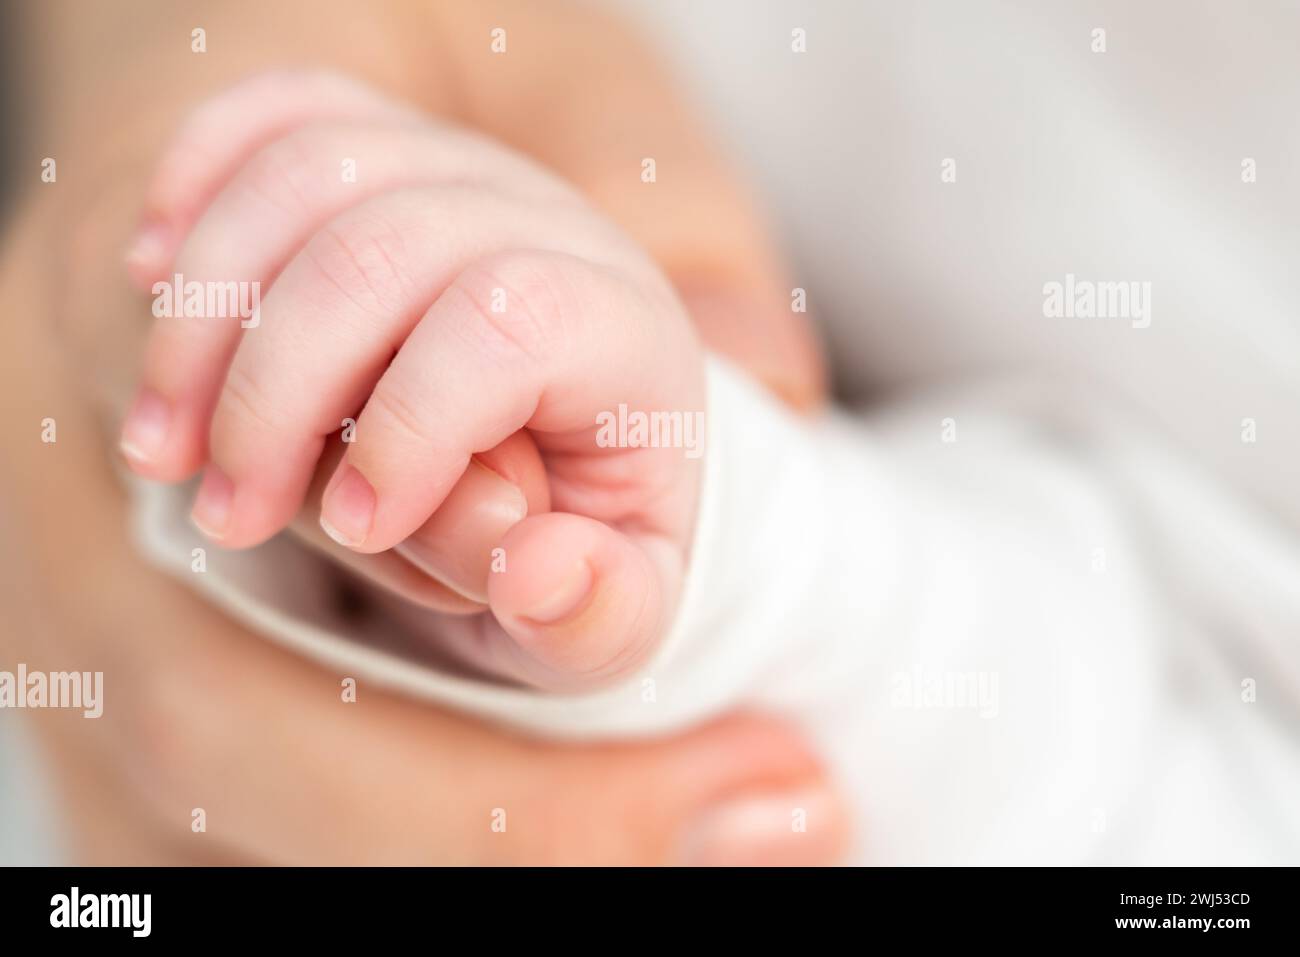 In sleep, newborn clings to maternal warmth. Concept of unbreakable bonds formed early Stock Photo